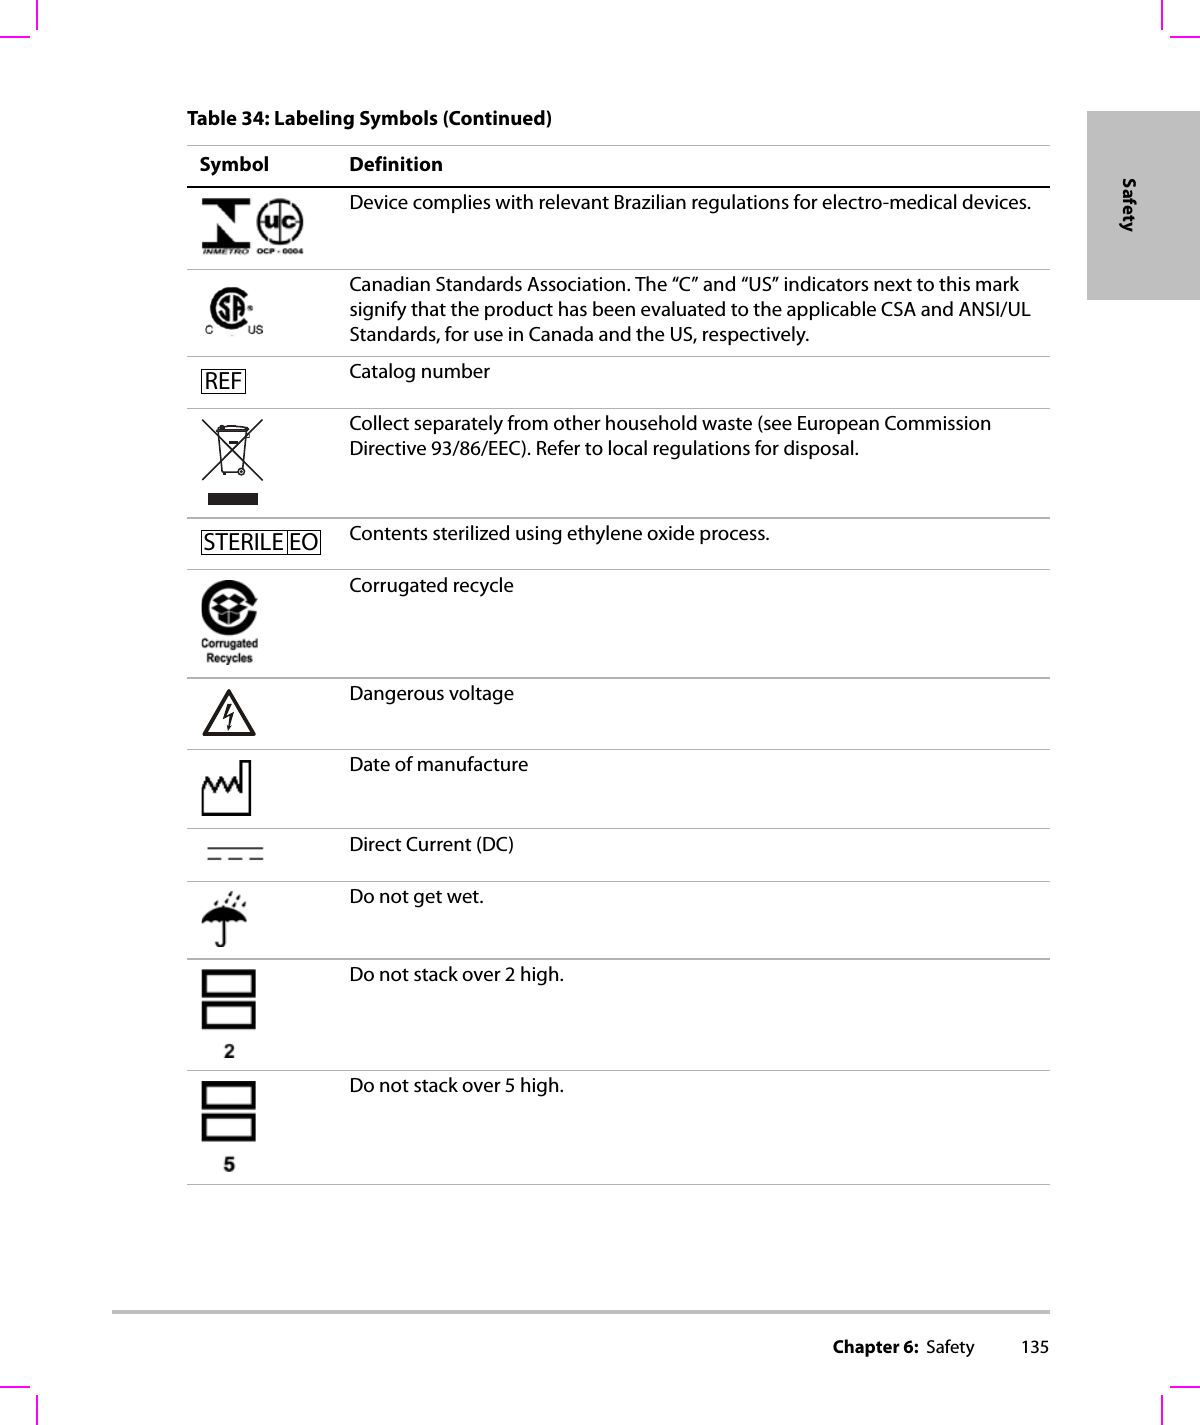 Chapter 6:  Safety 135SafetyDevice complies with relevant Brazilian regulations for electro-medical devices.Canadian Standards Association. The “C” and “US” indicators next to this mark signify that the product has been evaluated to the applicable CSA and ANSI/UL Standards, for use in Canada and the US, respectively.Catalog numberCollect separately from other household waste (see European Commission Directive 93/86/EEC). Refer to local regulations for disposal.Contents sterilized using ethylene oxide process.Corrugated recycleDangerous voltageDate of manufactureDirect Current (DC)Do not get wet.Do not stack over 2 high.Do not stack over 5 high.Table 34: Labeling Symbols (Continued)Symbol DefinitionREFSTERILE EO